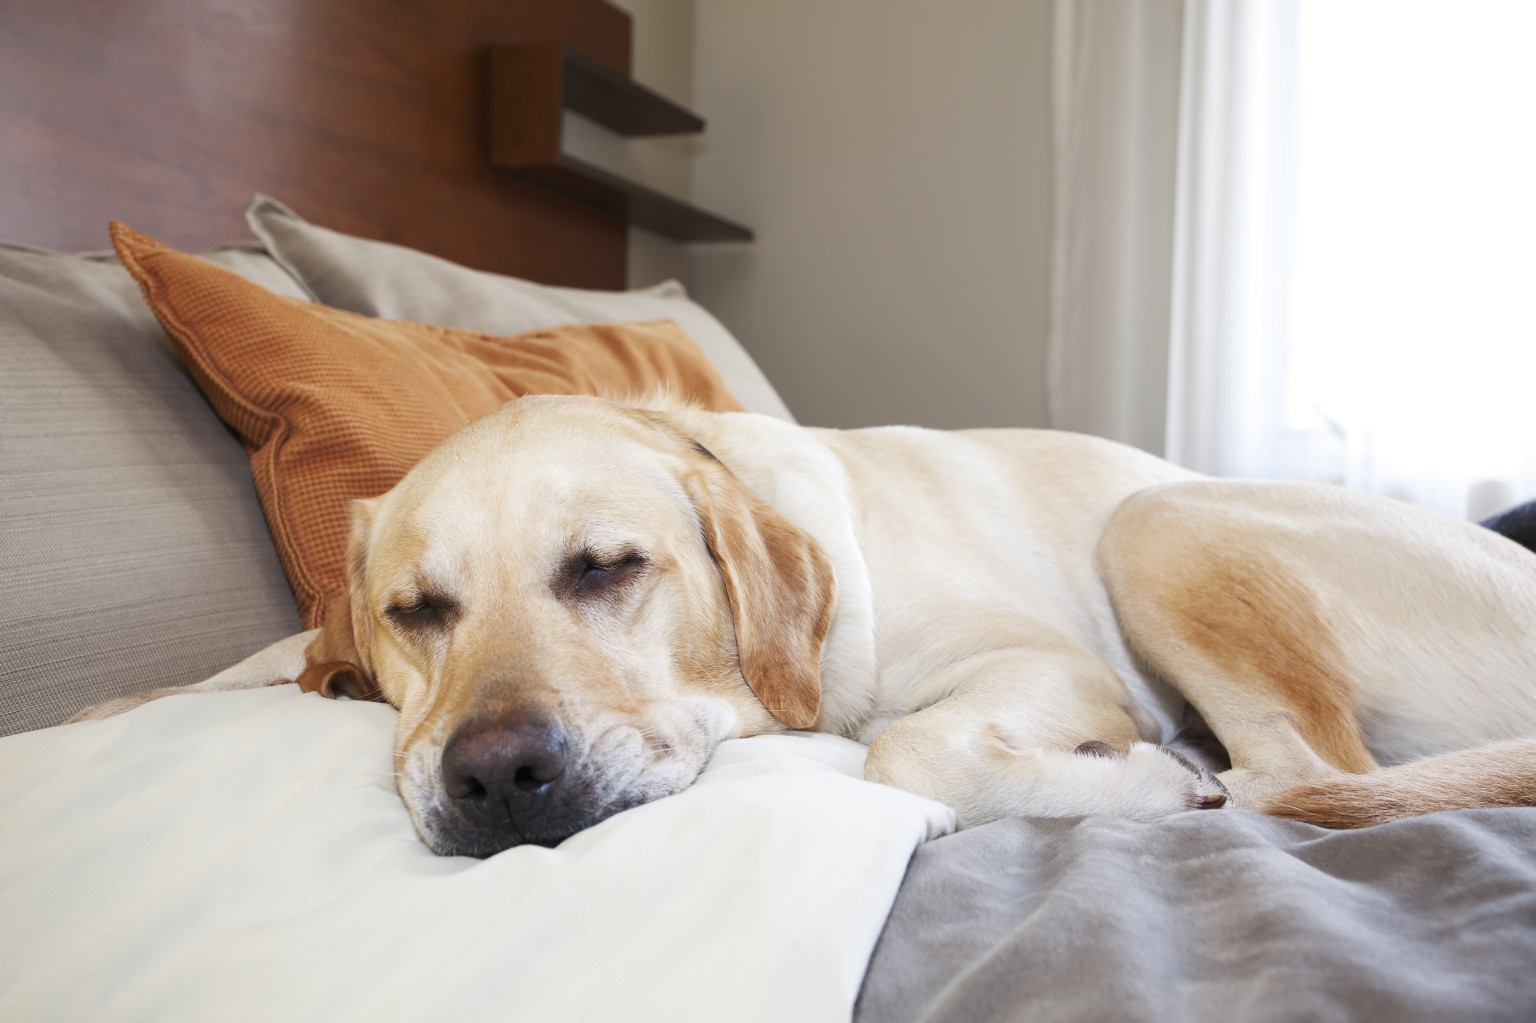 Dog-Friendly Hotels Catering To More Pet Owners With ...